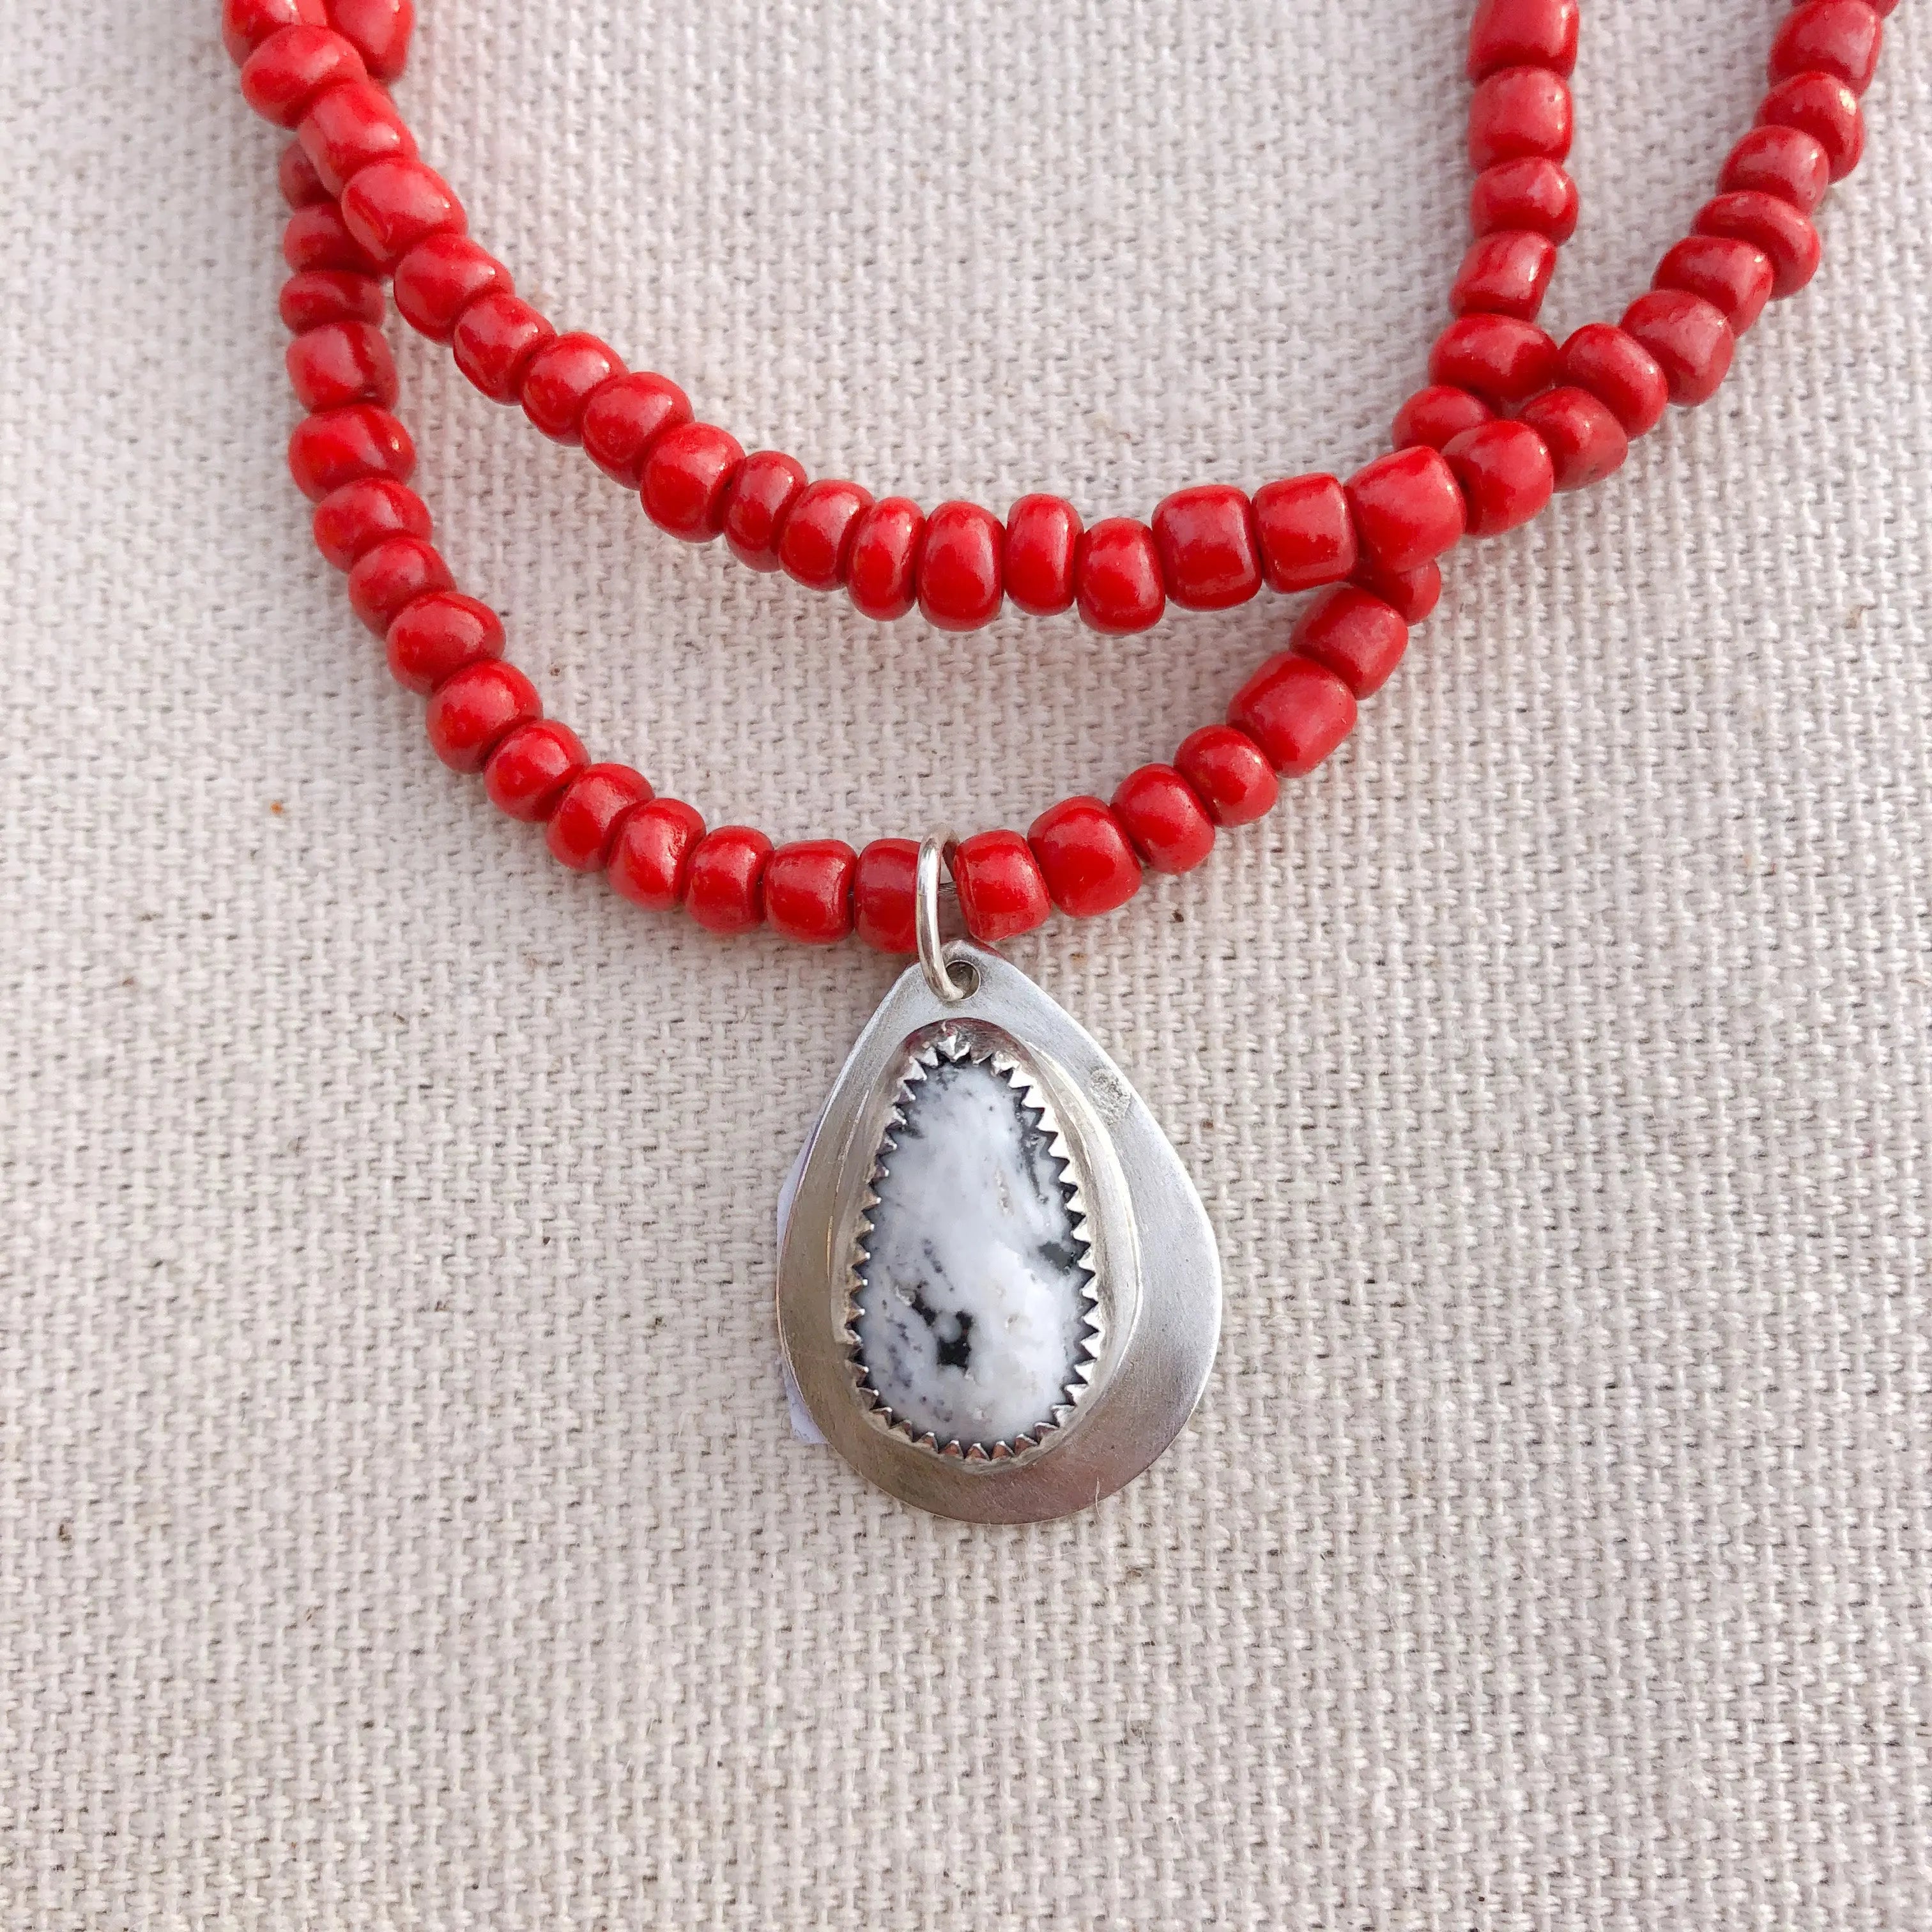 Red & White Necklace #412 - Citrine Health